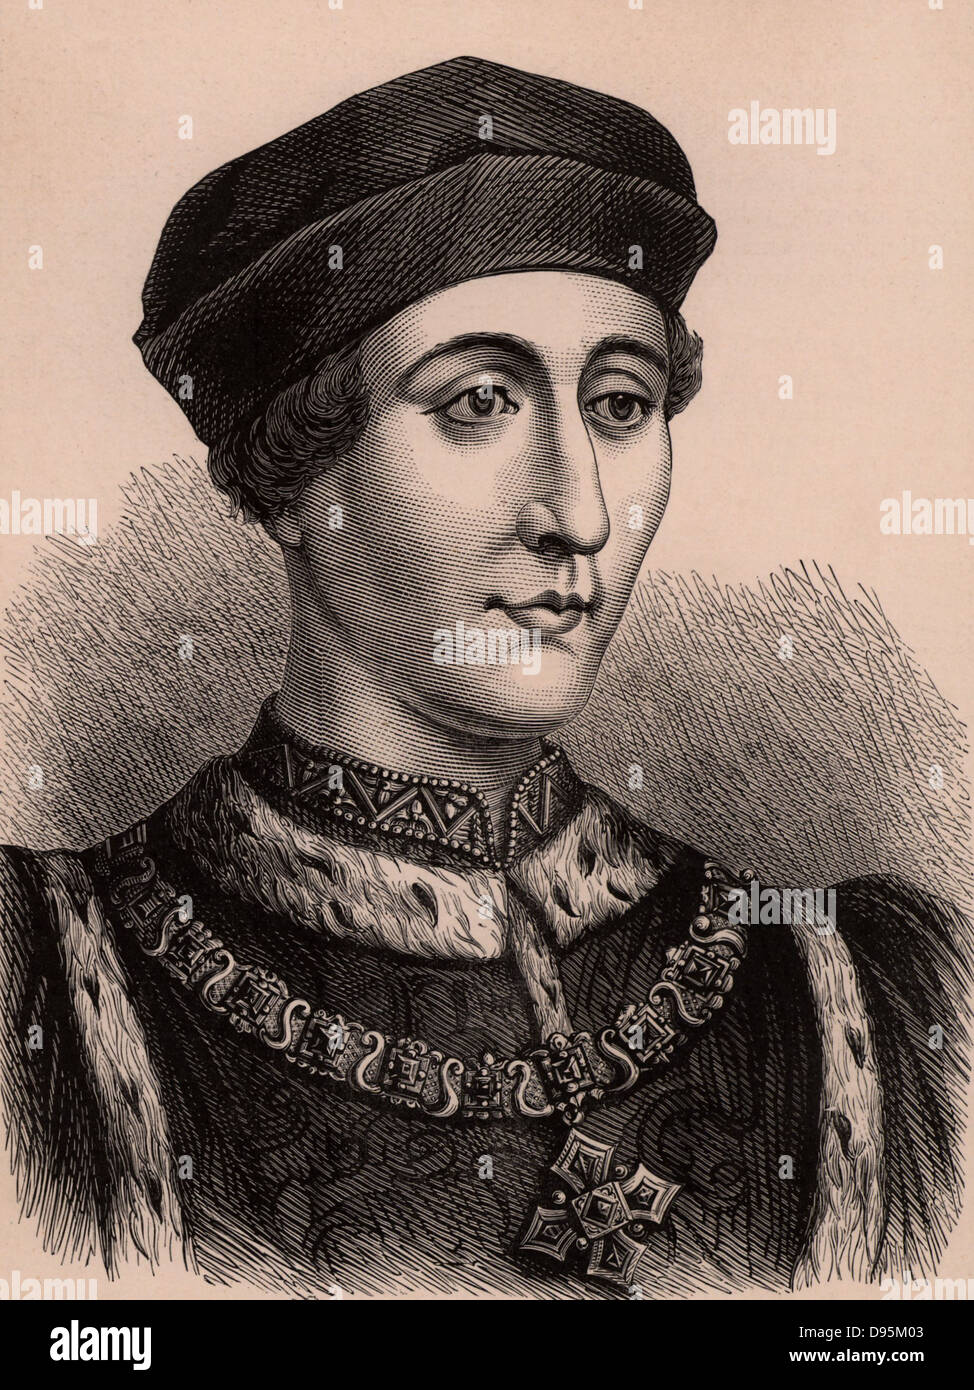 Henry VI (1421-71) king of England from 1422, only child of Henry V and Catherine of Valois. Last Plantagenet king of England his throne was usurped by Edward IV in 1461. Henry was murdered 21 May 1471. Wood engraving c1900. Stock Photo